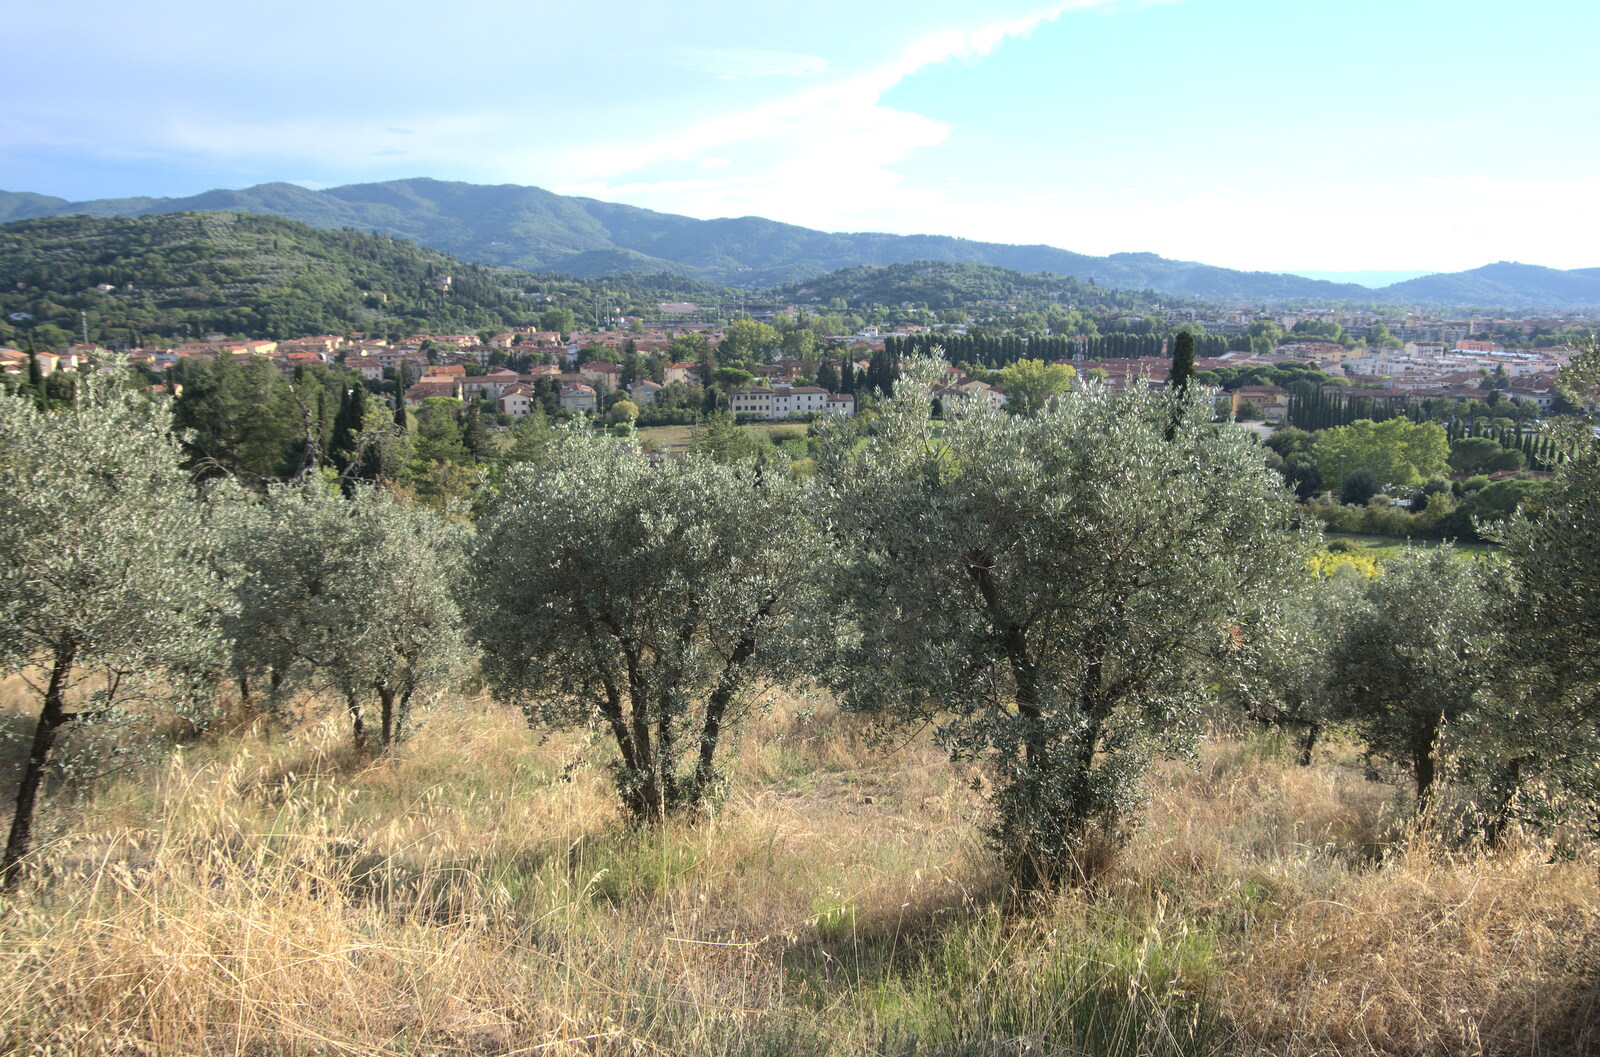 A Day by the Pool and a Festival Rehearsal, Arezzo, Italy - 3rd September 2022: There's an olive grove up the hill